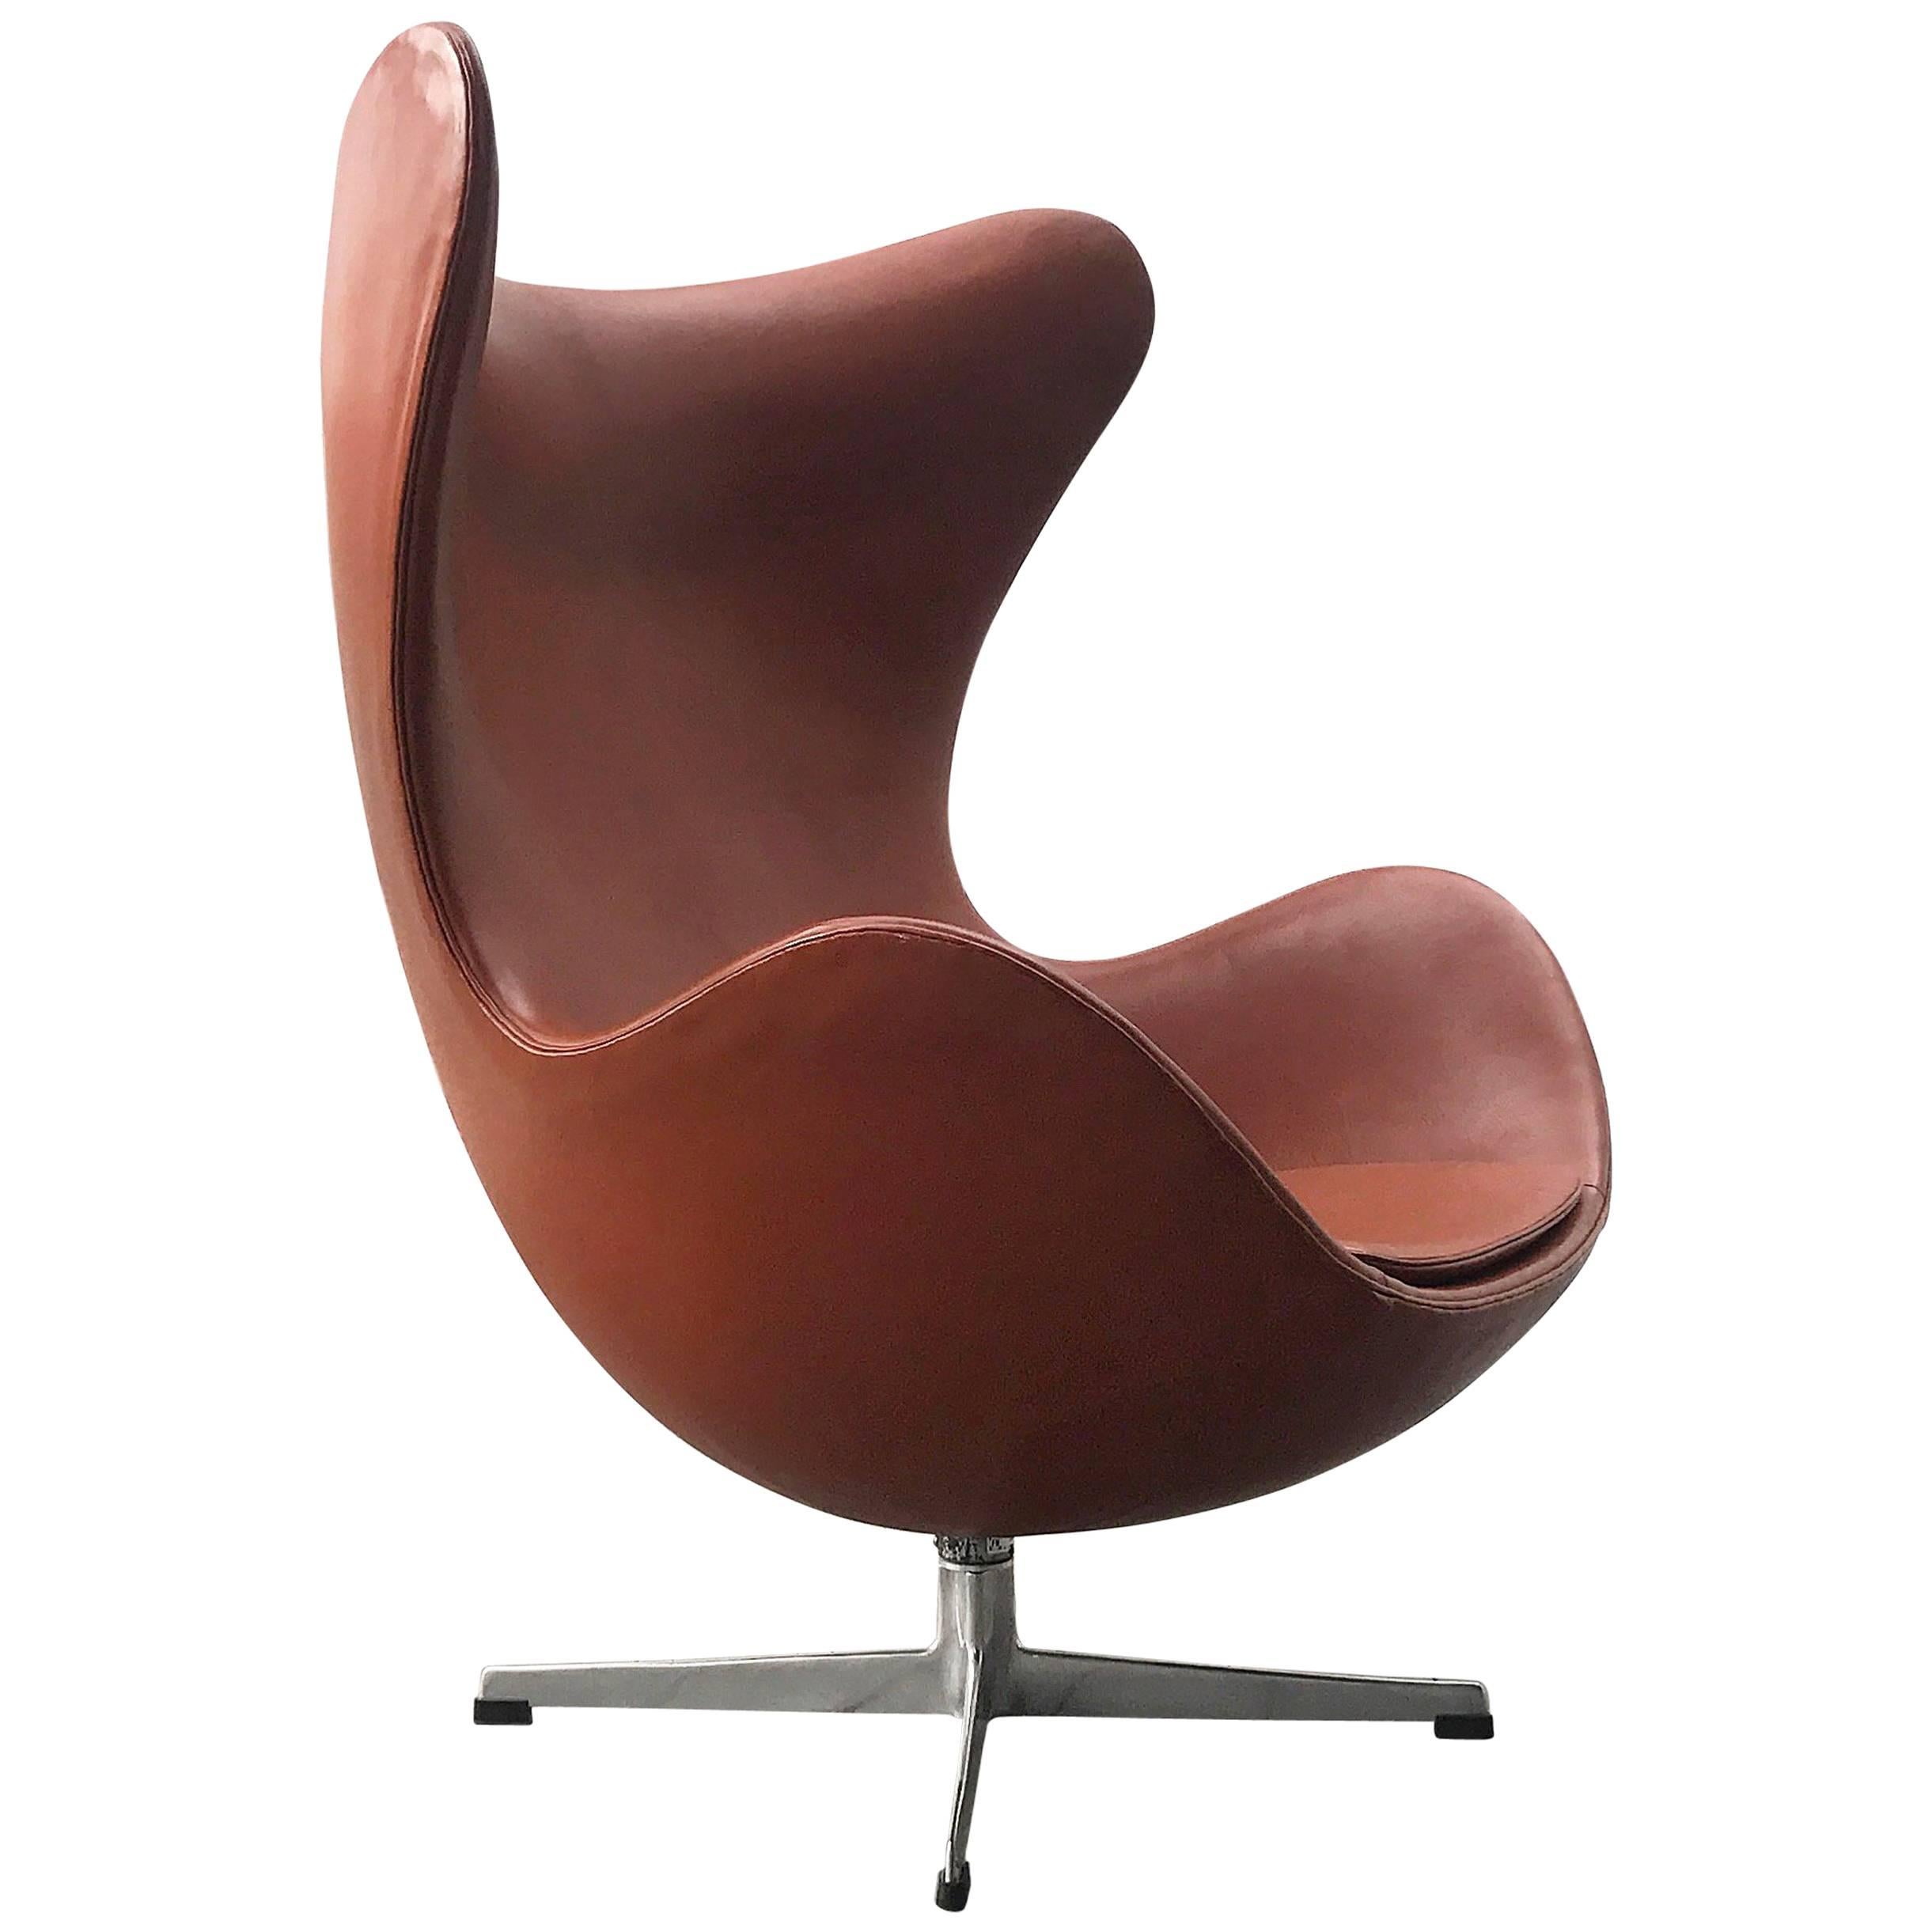 Early Vintage Authentic Leather Arne Jacobsen Egg Chair for Fritz Hansen